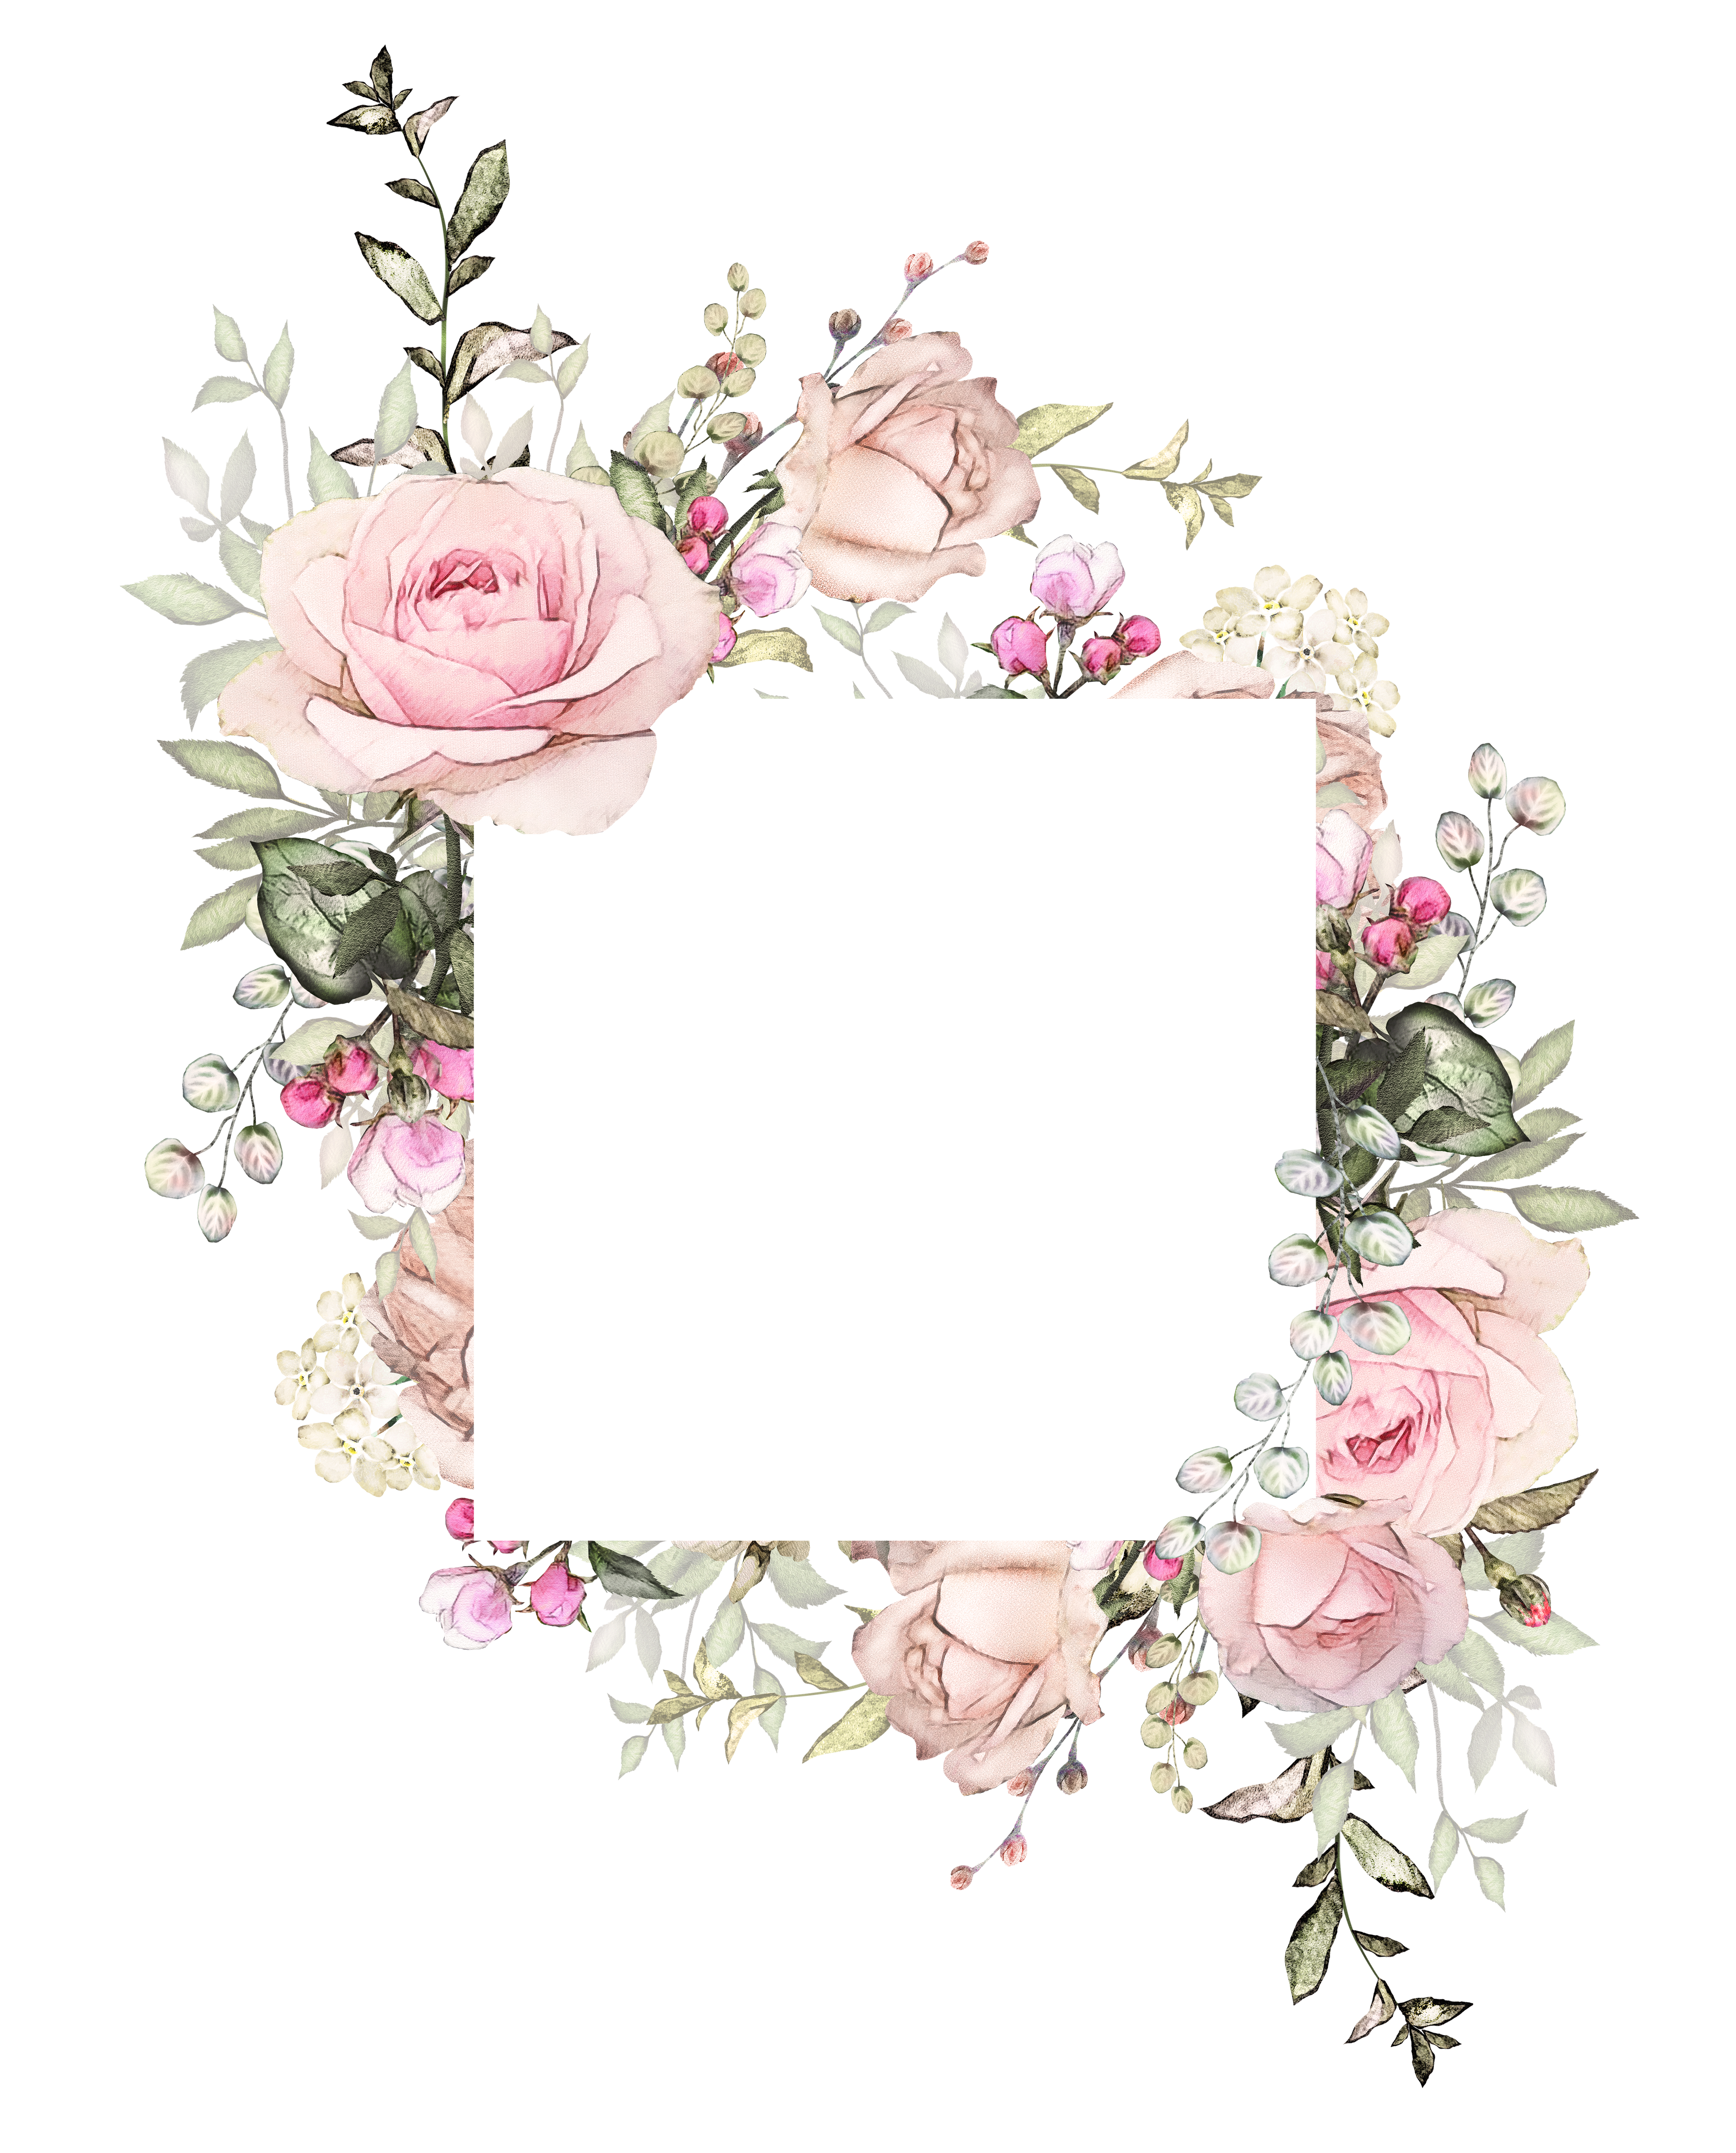 Library of boho flower wreath banner royalty free library png